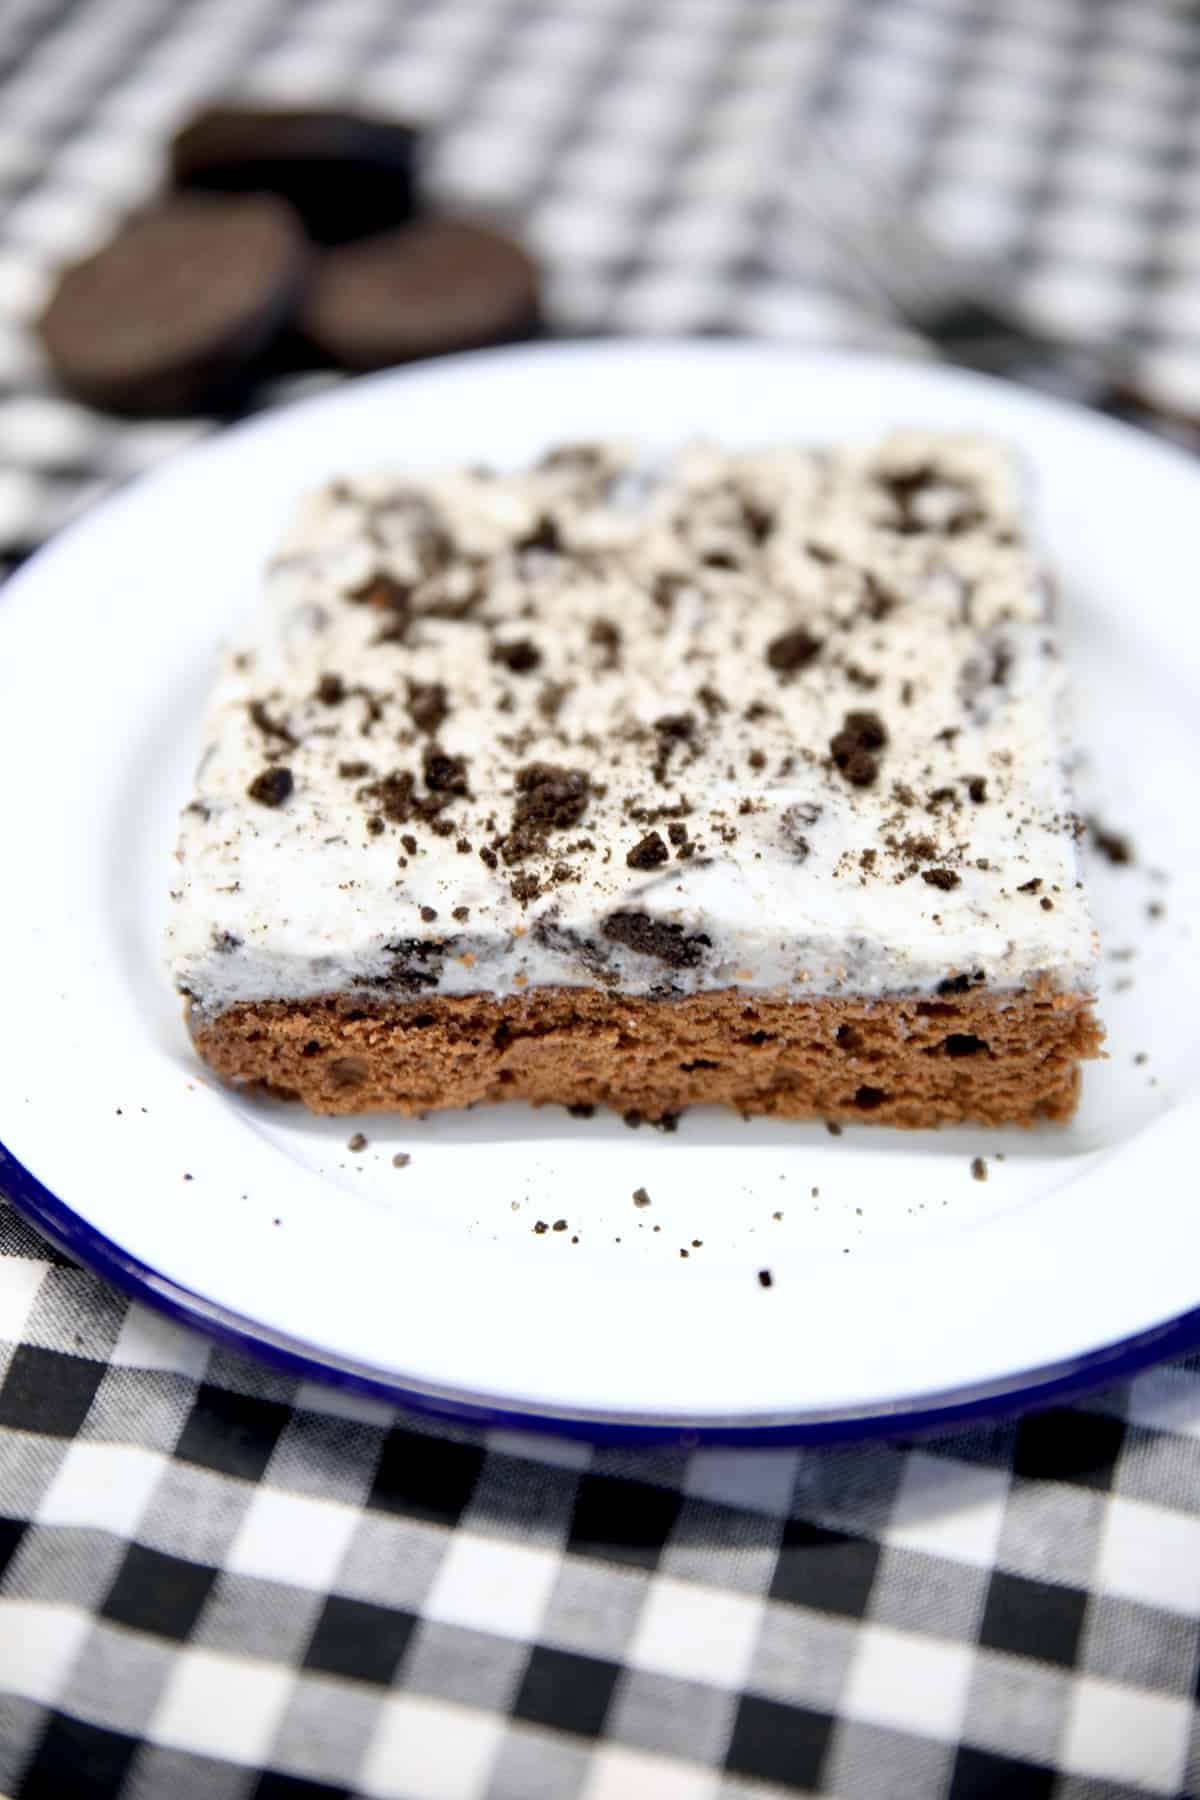 Chocolate sheet cake with oreo frosting - slice on a plate.